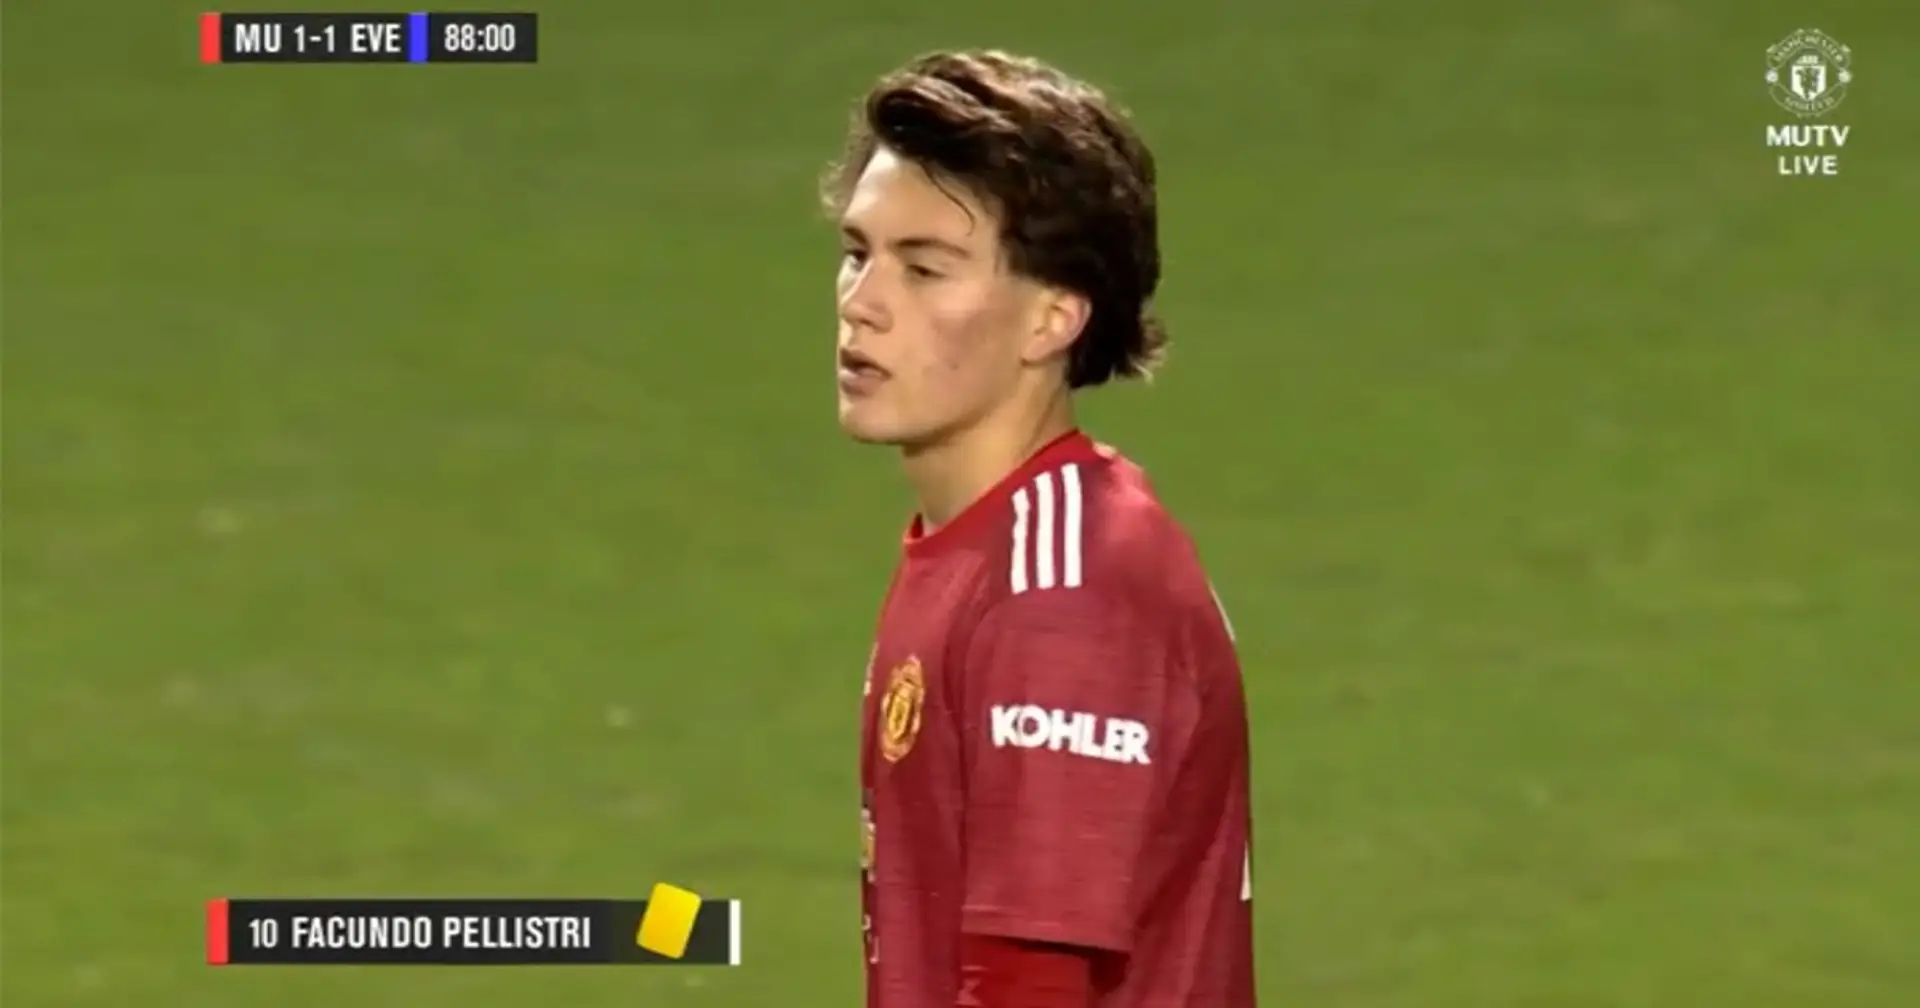 'Can confirm he is a baller': What global United fans say about Pellistri's U23 debut